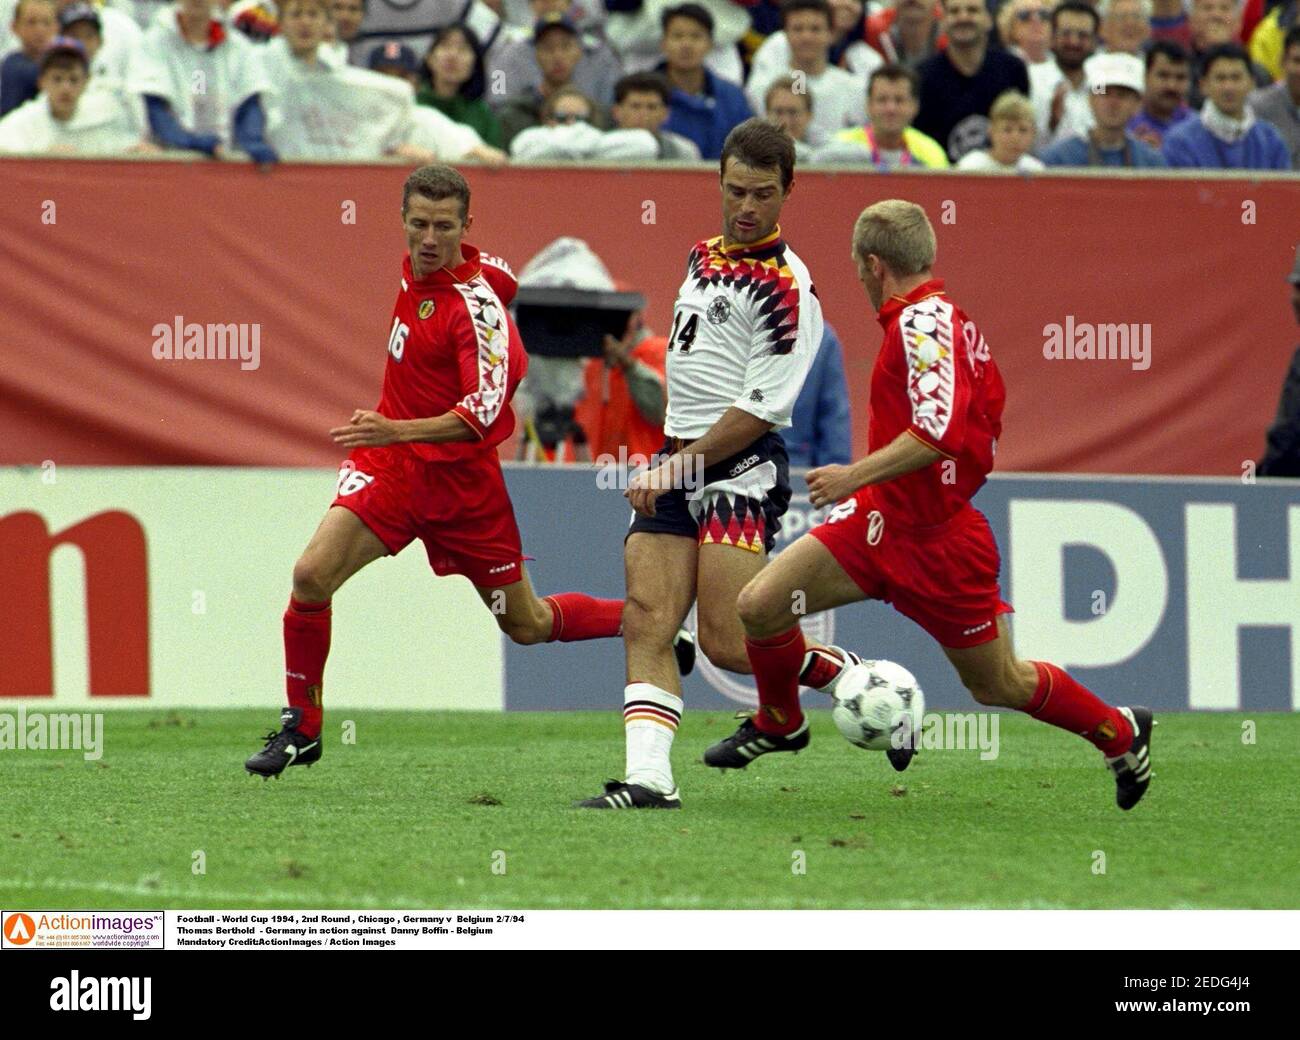 Football - World Cup 1994 , 2nd Round , Chicago , Germany v  Belgium 2/7/94  Thomas Berthold  - Germany in action against  Danny Boffin - Belgium  Mandatory Credit:ActionImages / Action Images Stock Photo